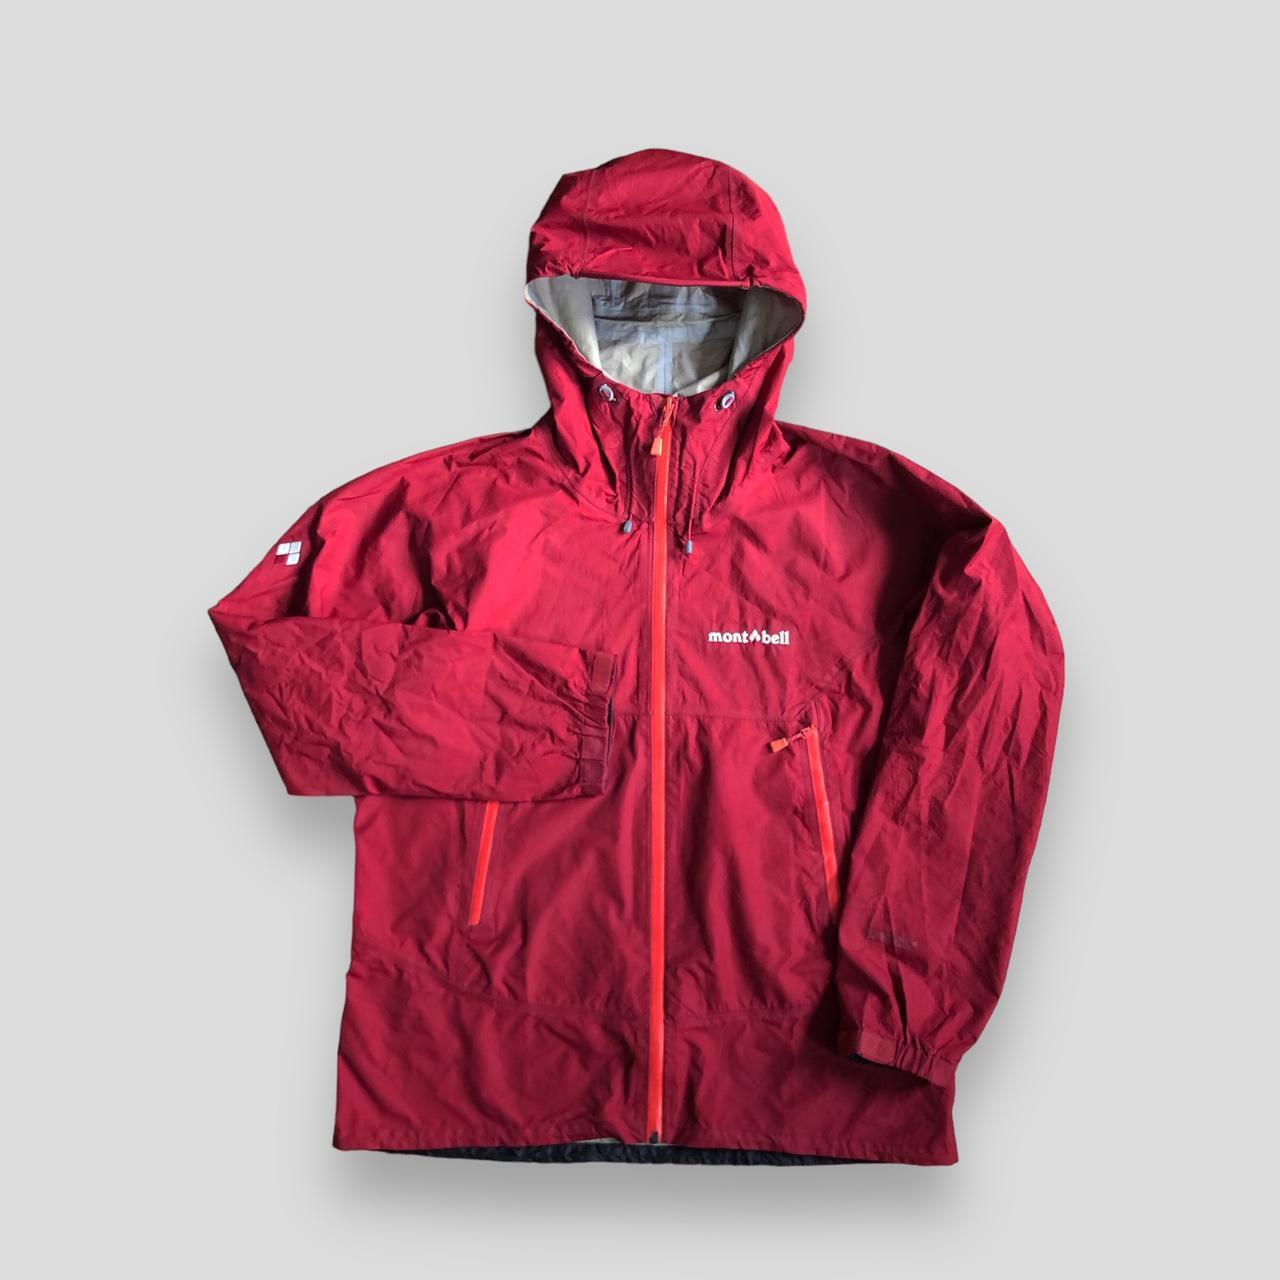 Montbell GoreTex jacket in red. Women’s size large